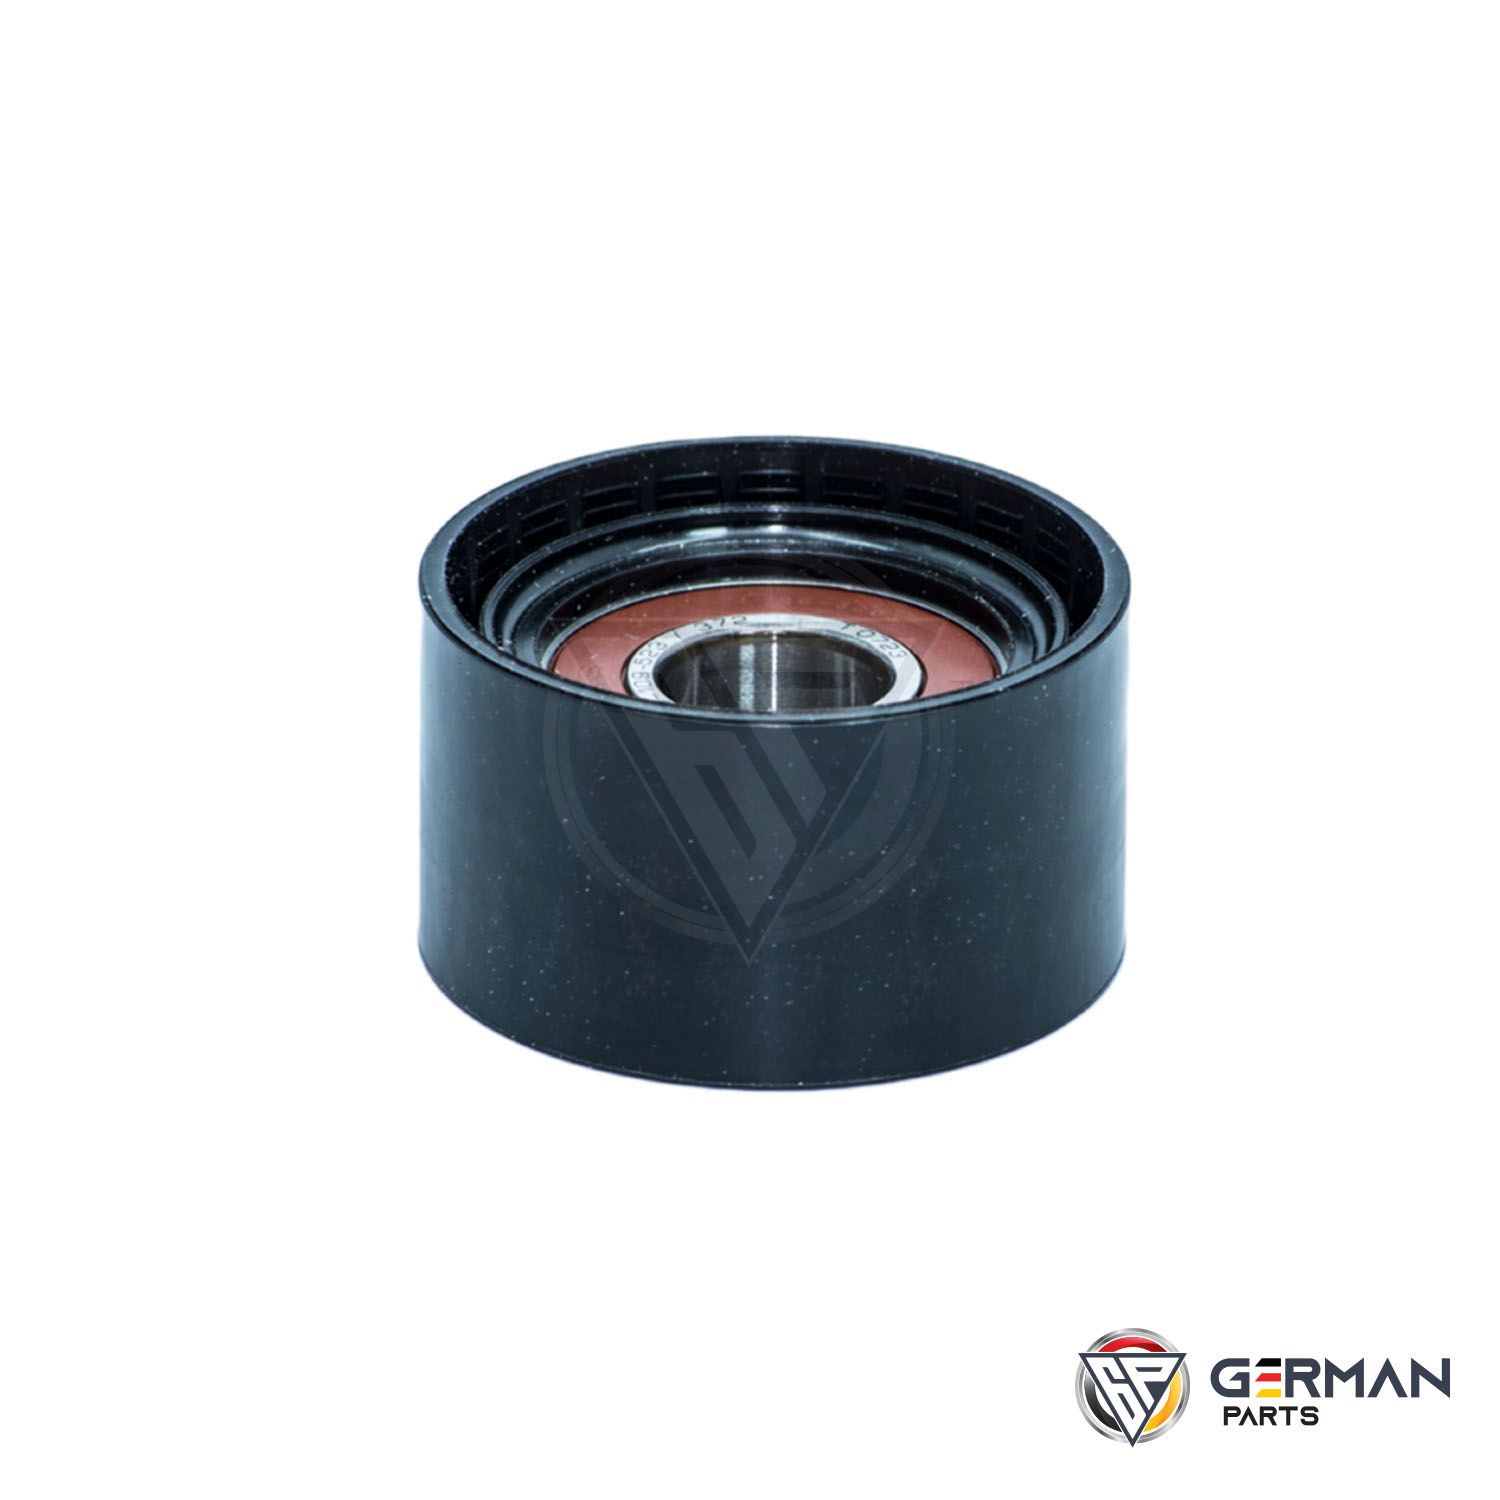 Buy Mercedes Benz Sheave Pulley 6422001070 - German Parts